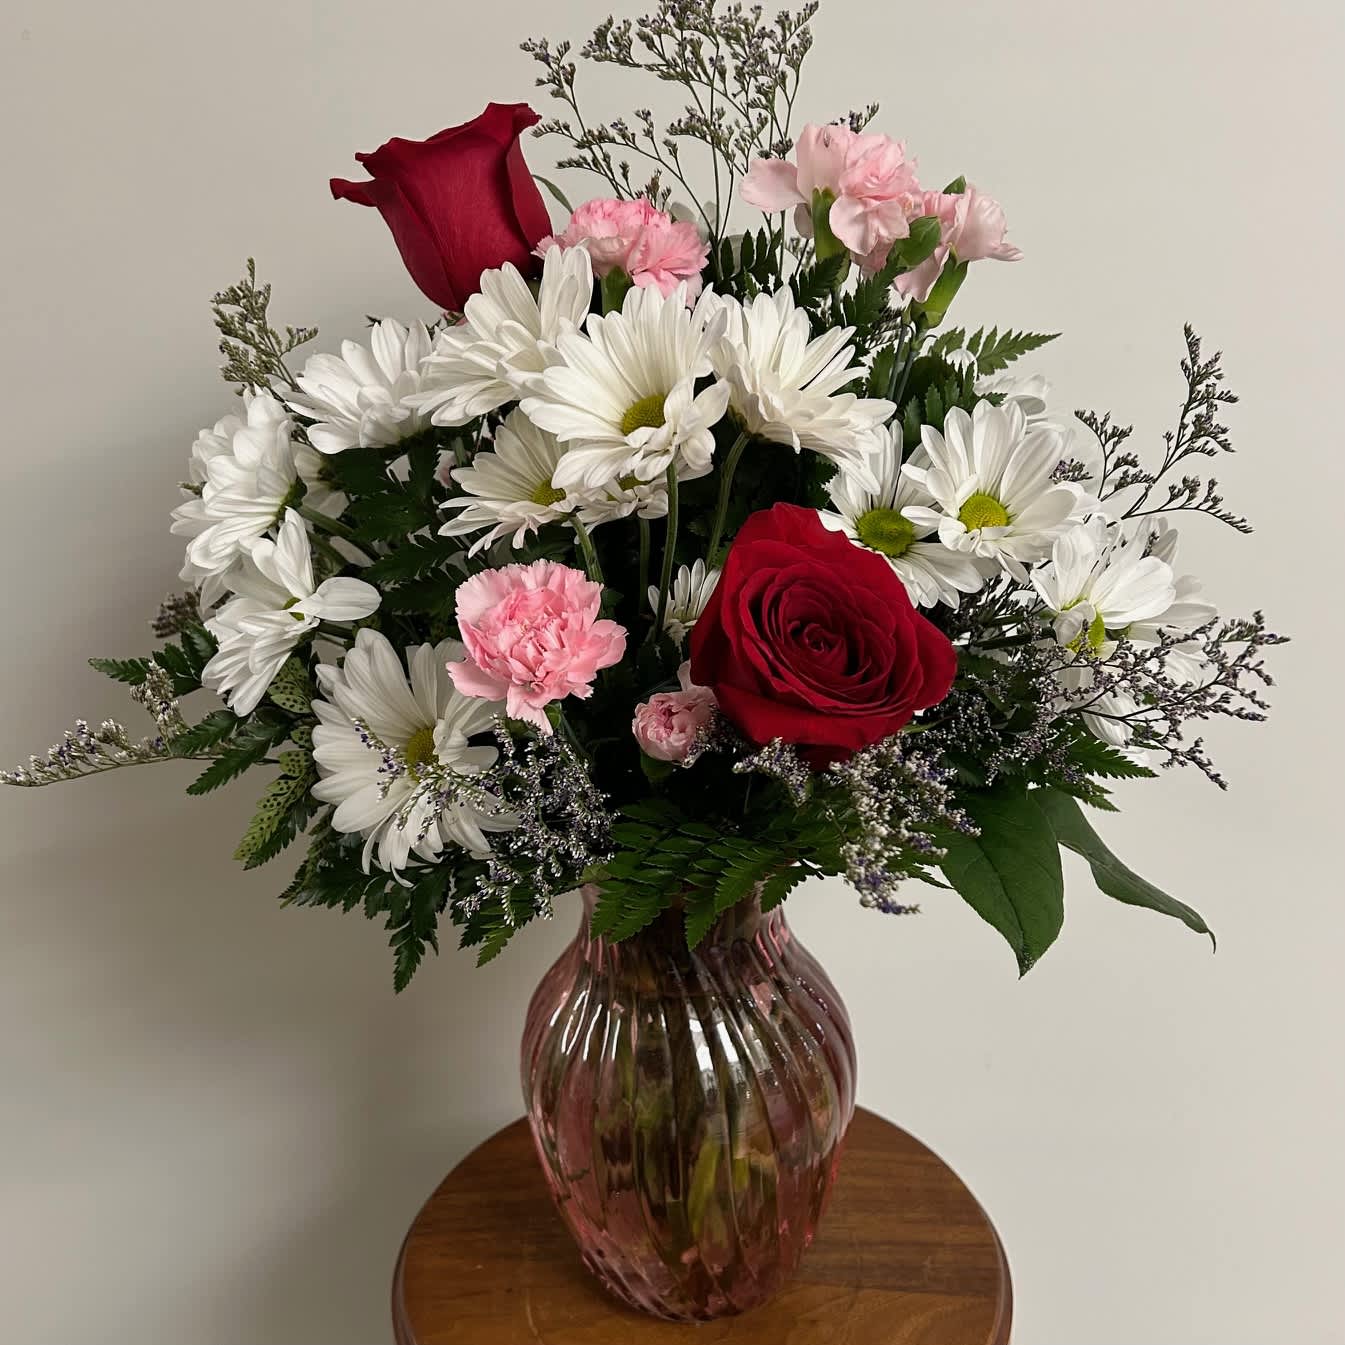 Boldly Bashful - Boldly Bashful is a great gift for Valentine's Day or Birthday.  This all-around arrangement Includes 3 RED ROSES and flowers such as white daisies, carnations. Vase color may vary! 